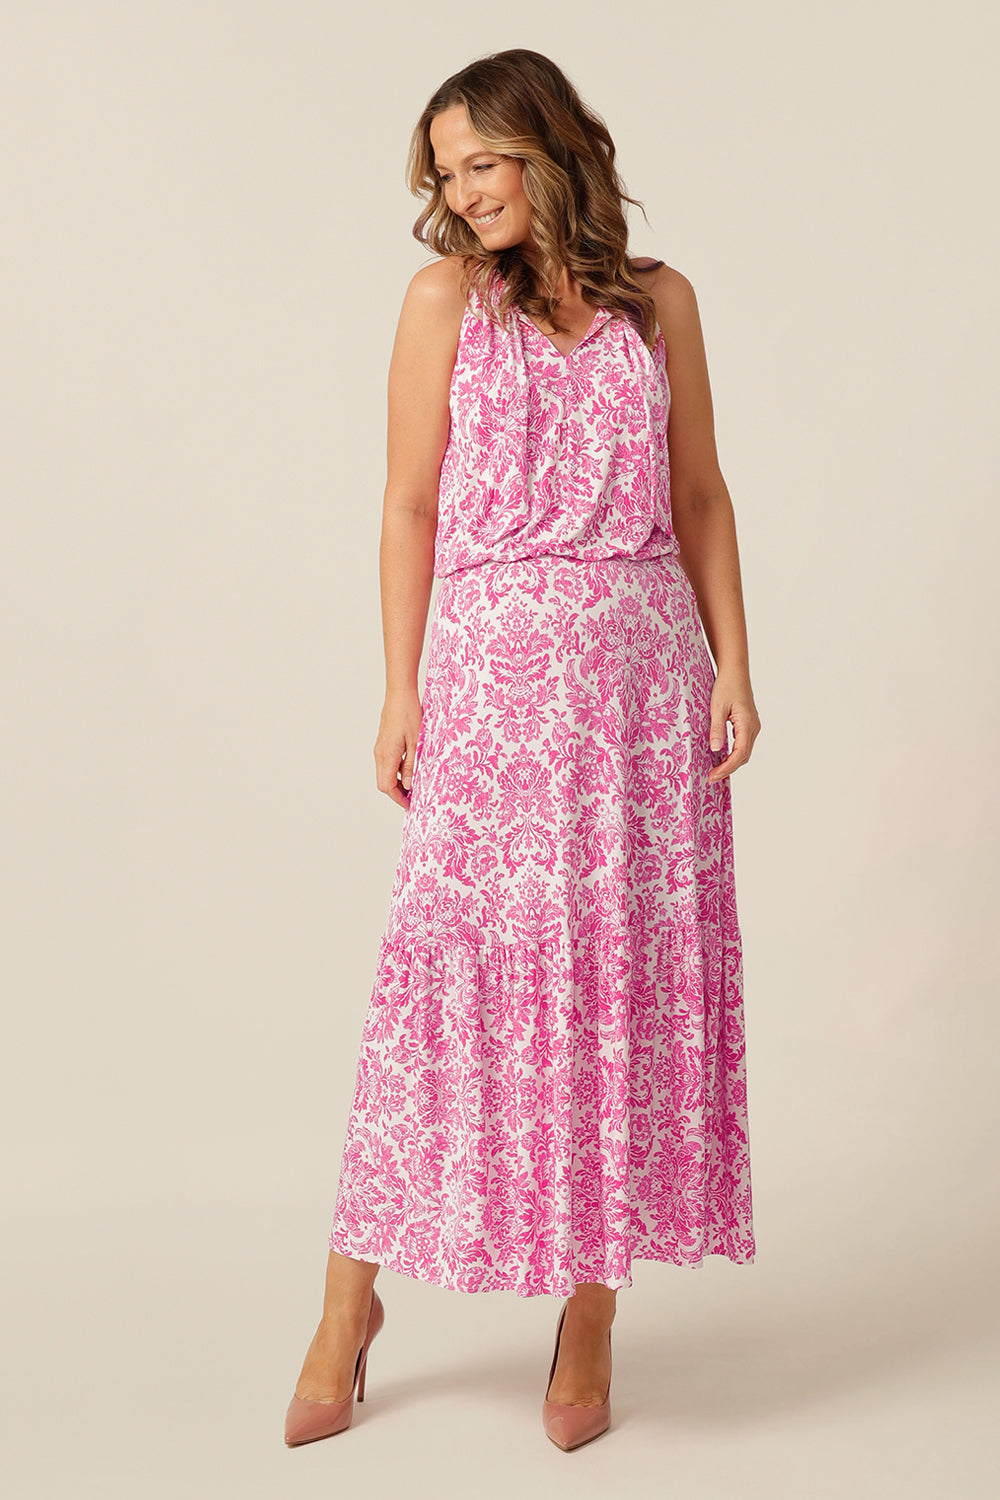 model wears white and pink patterned maxi dress australia